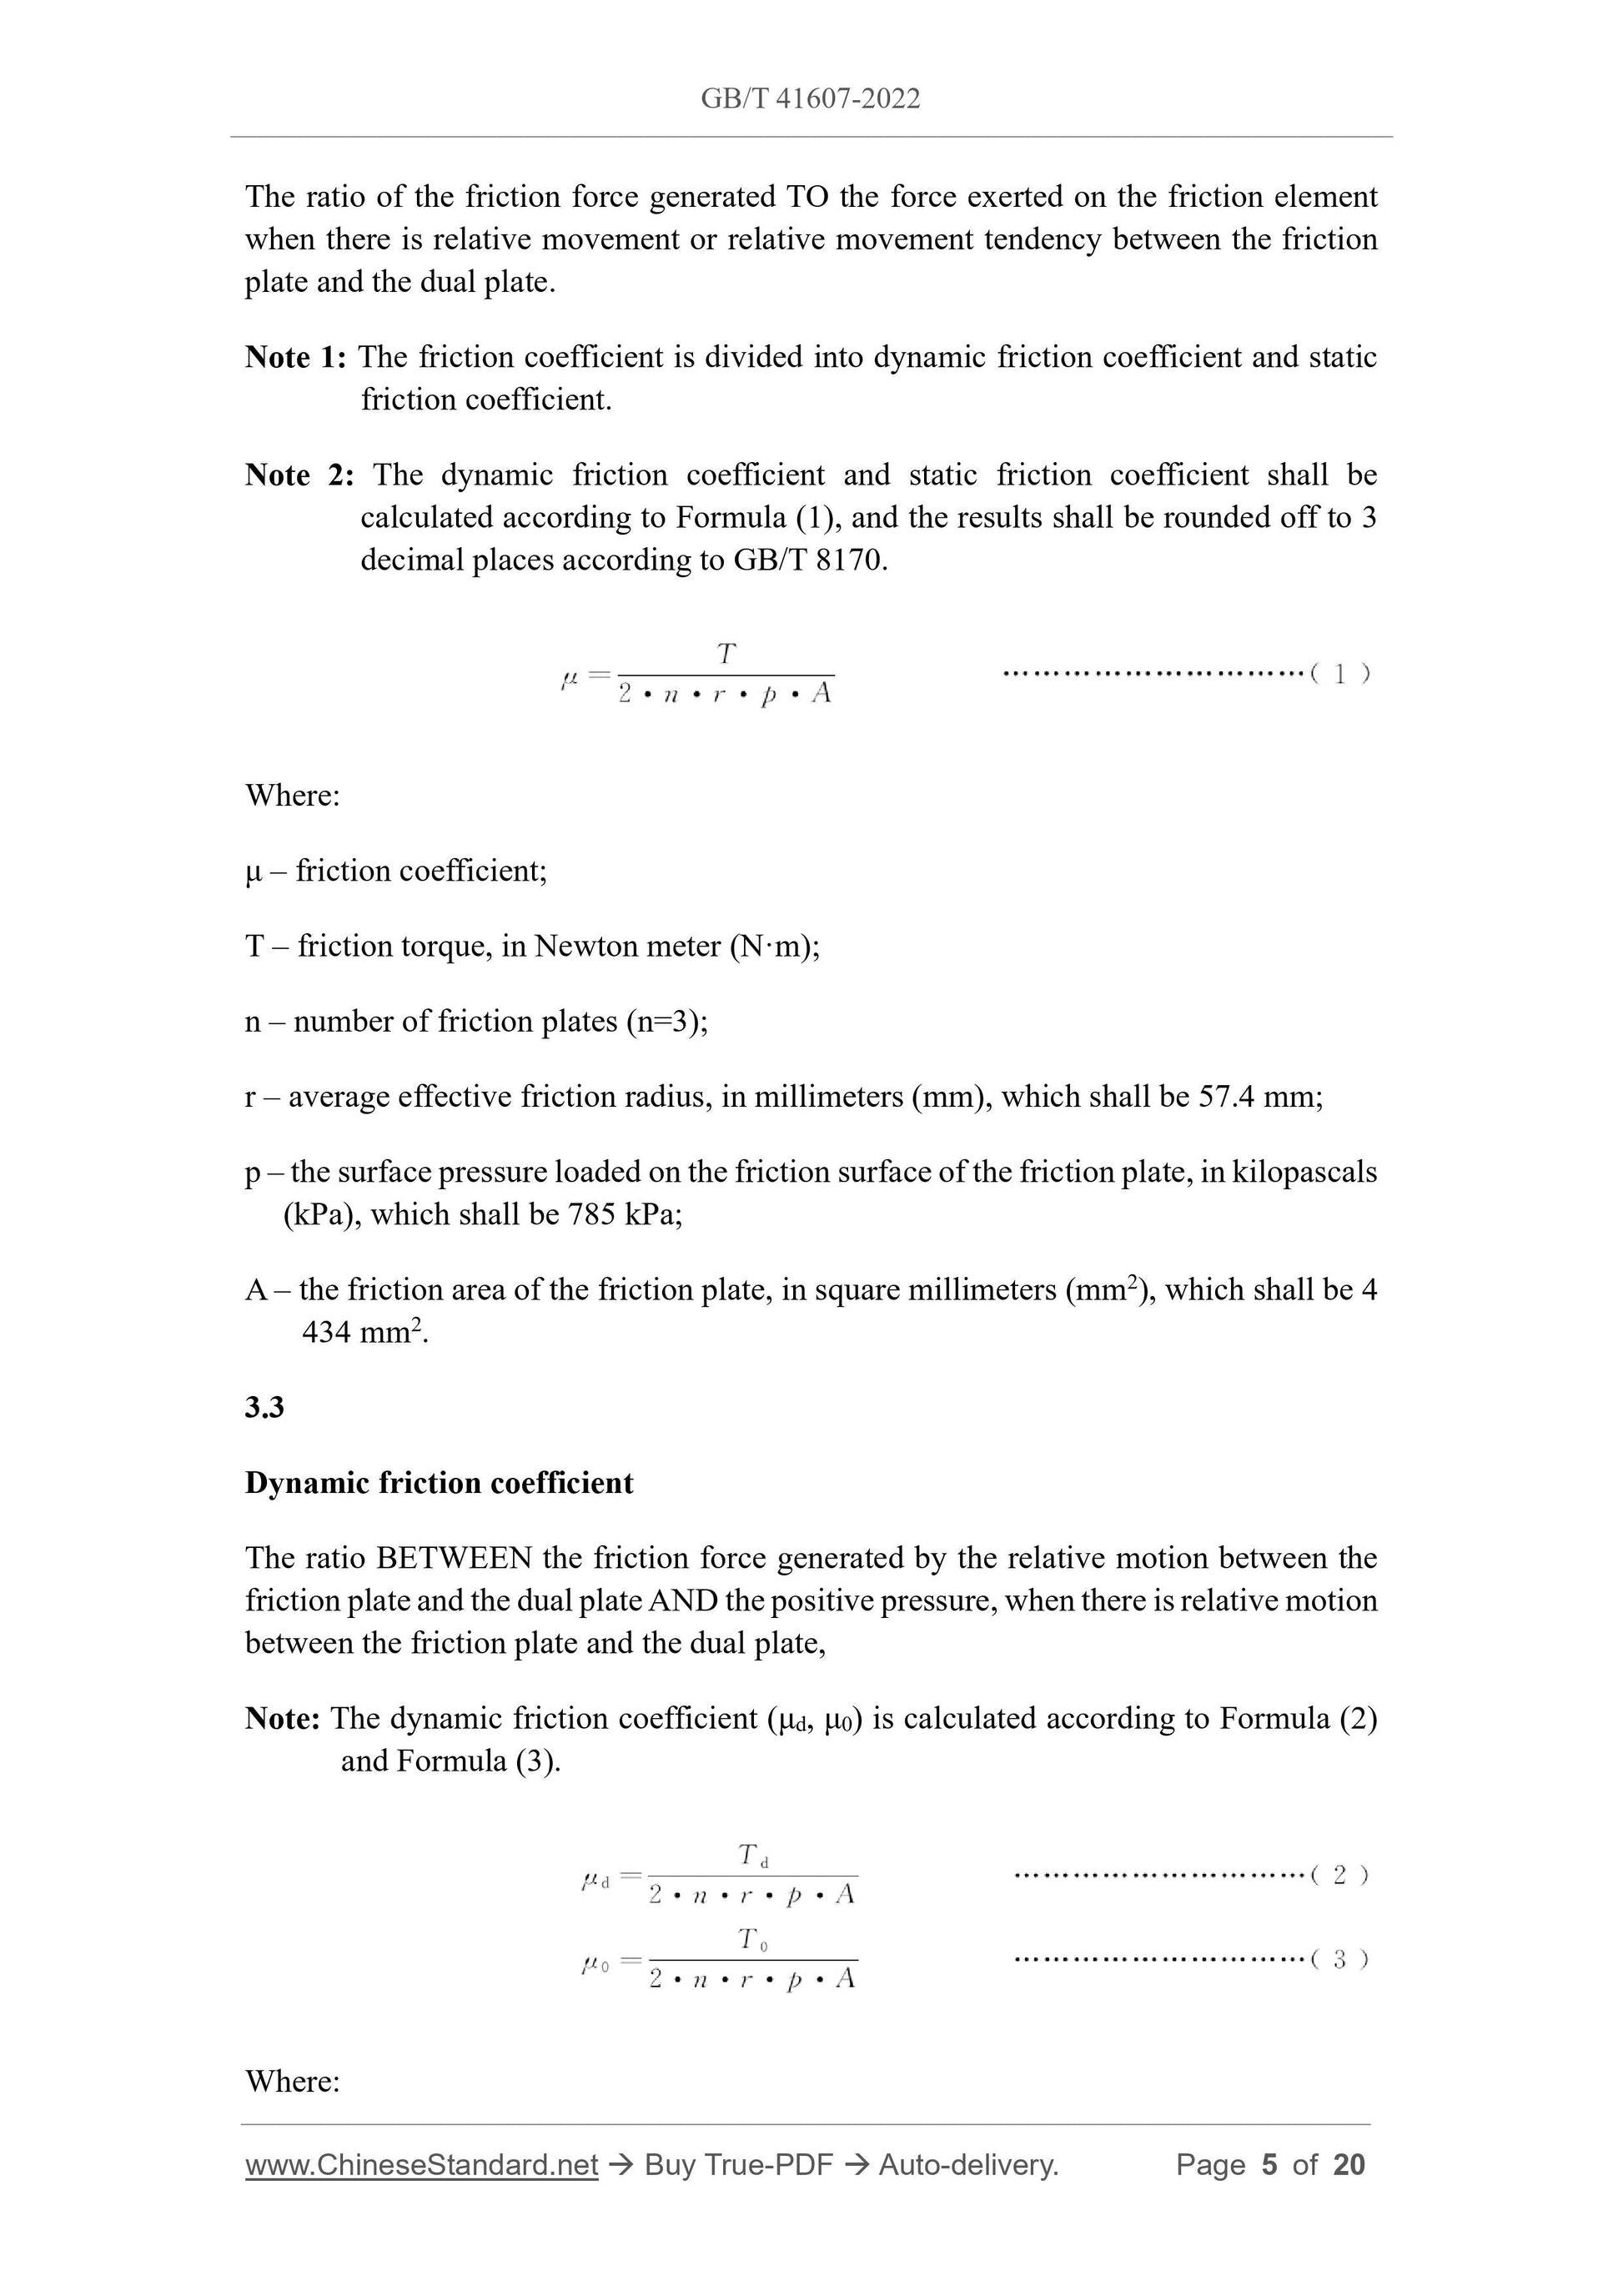 GB/T 41607-2022 Page 4